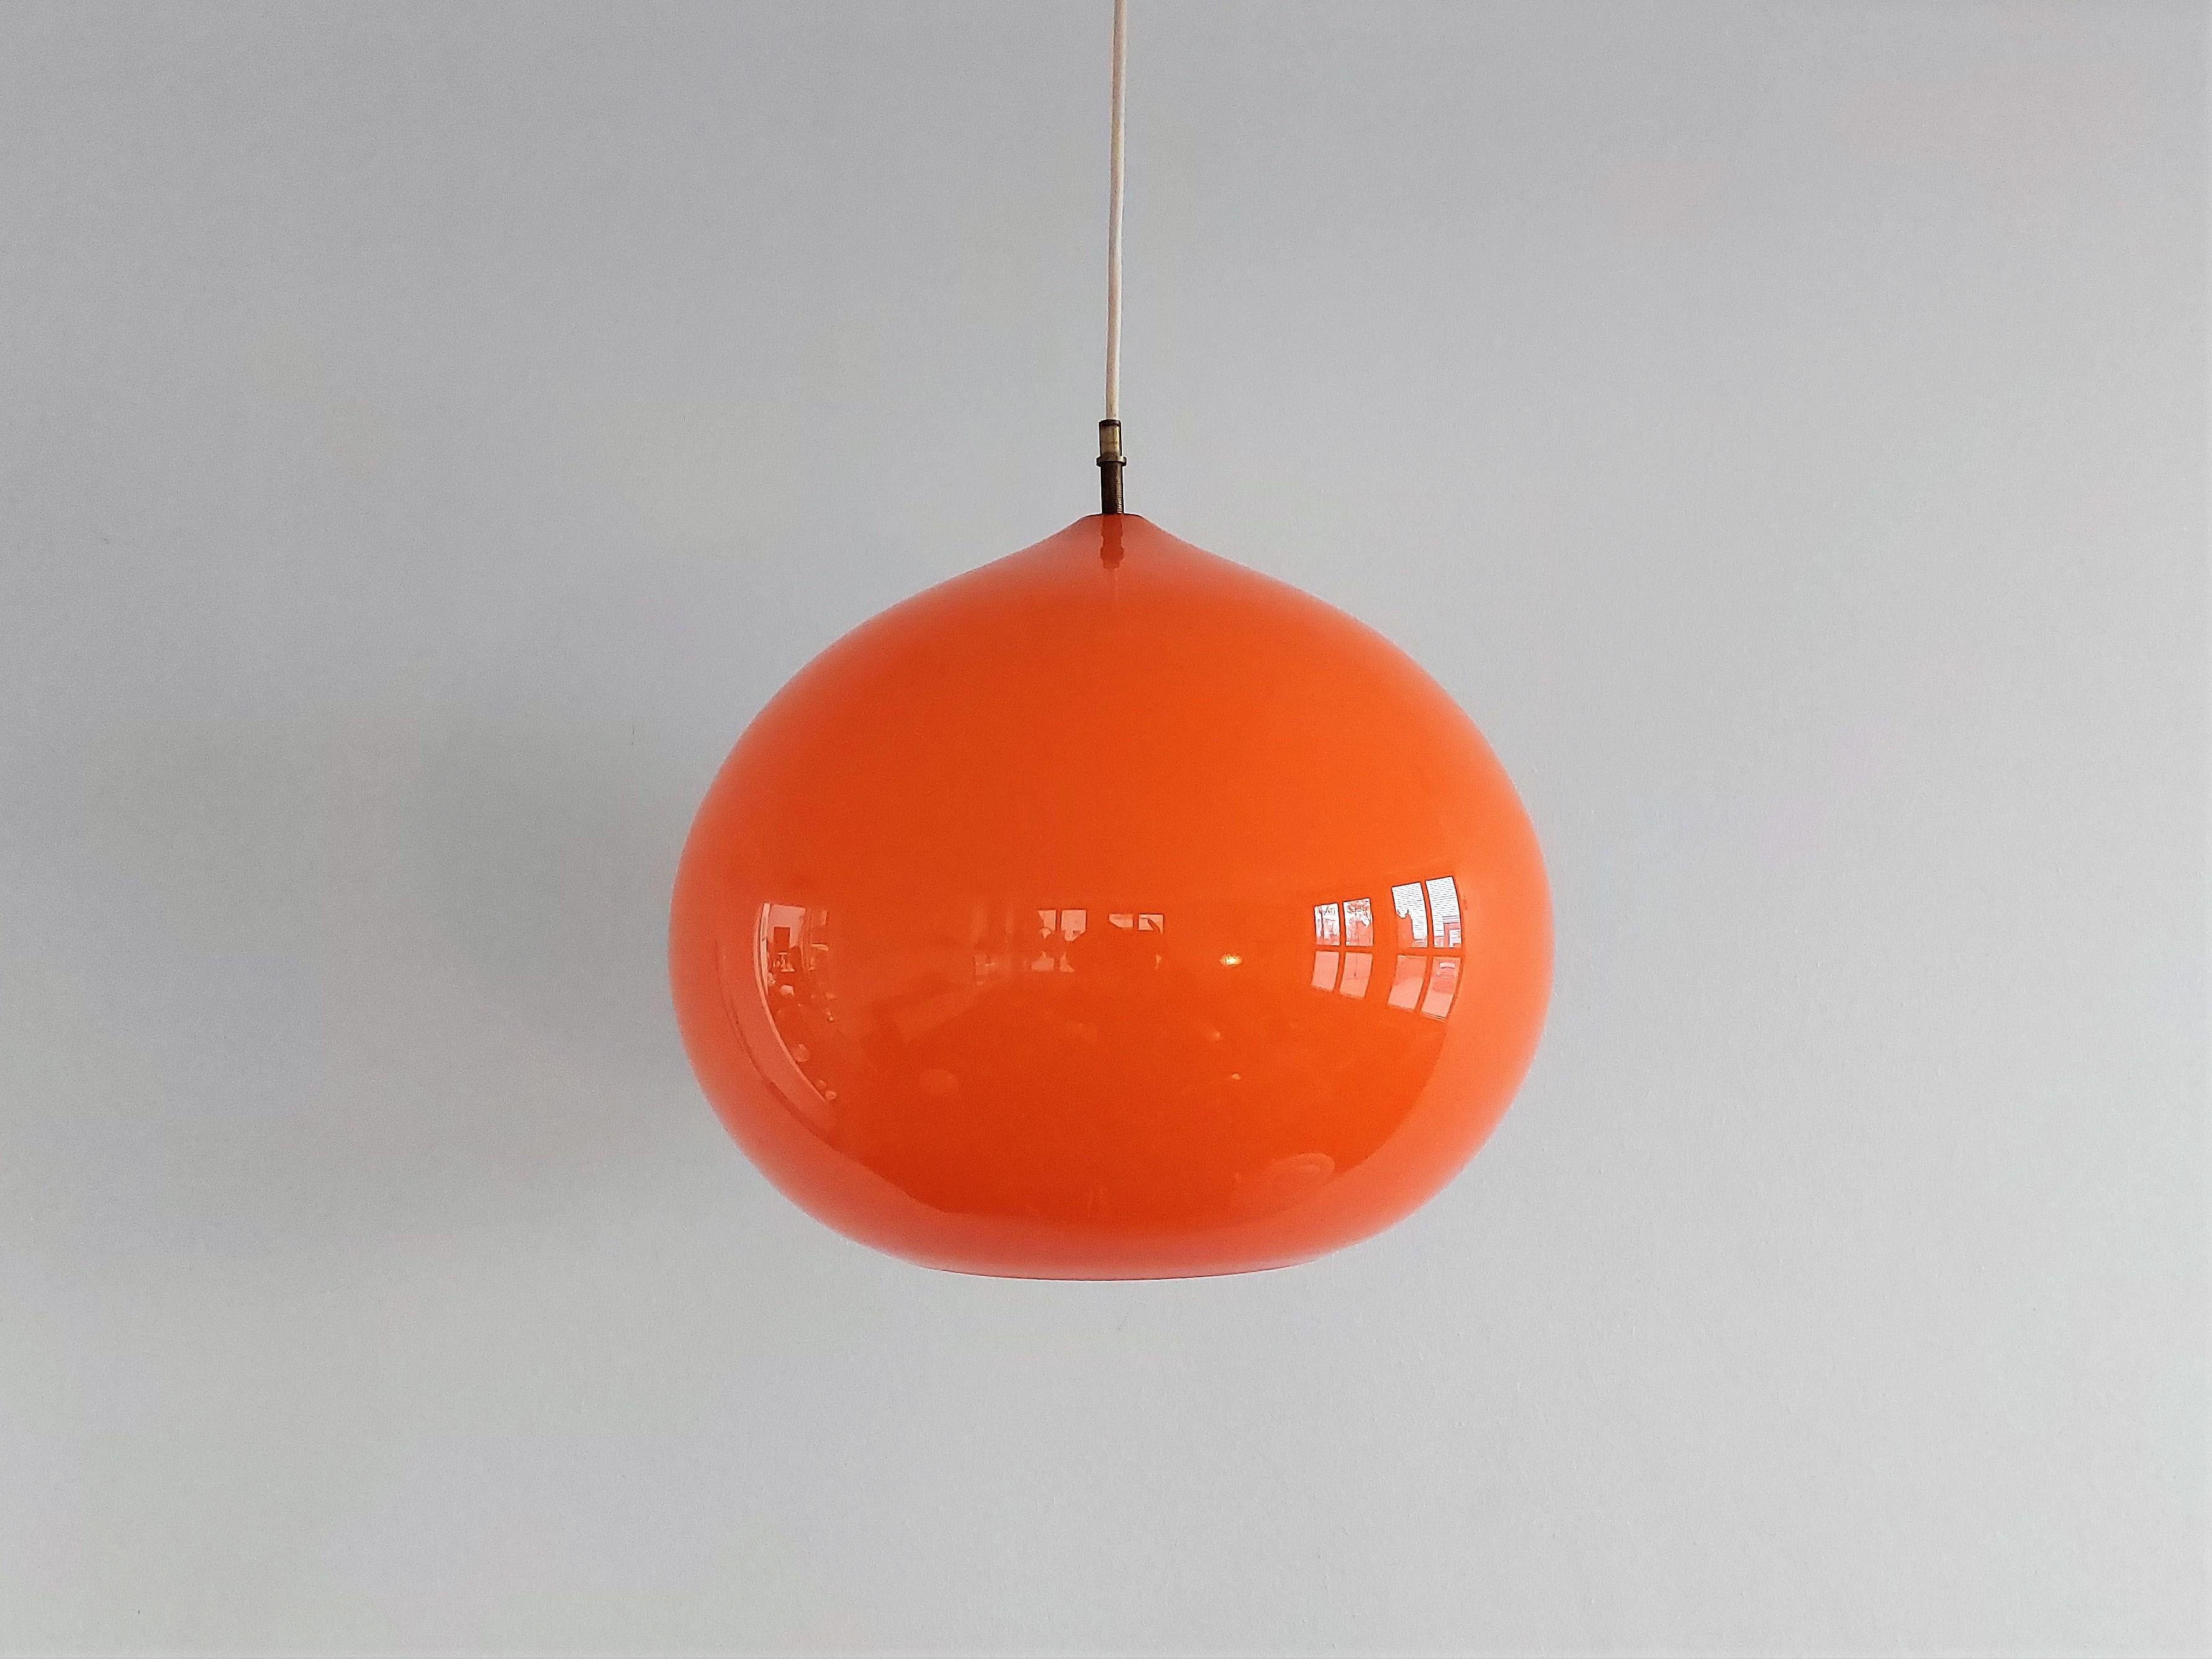 This very beautiful pendant lamp, model 'Cipola' or 'Onion', was designed by Alessandro Pianon for Vistosi in Italy. The orange 